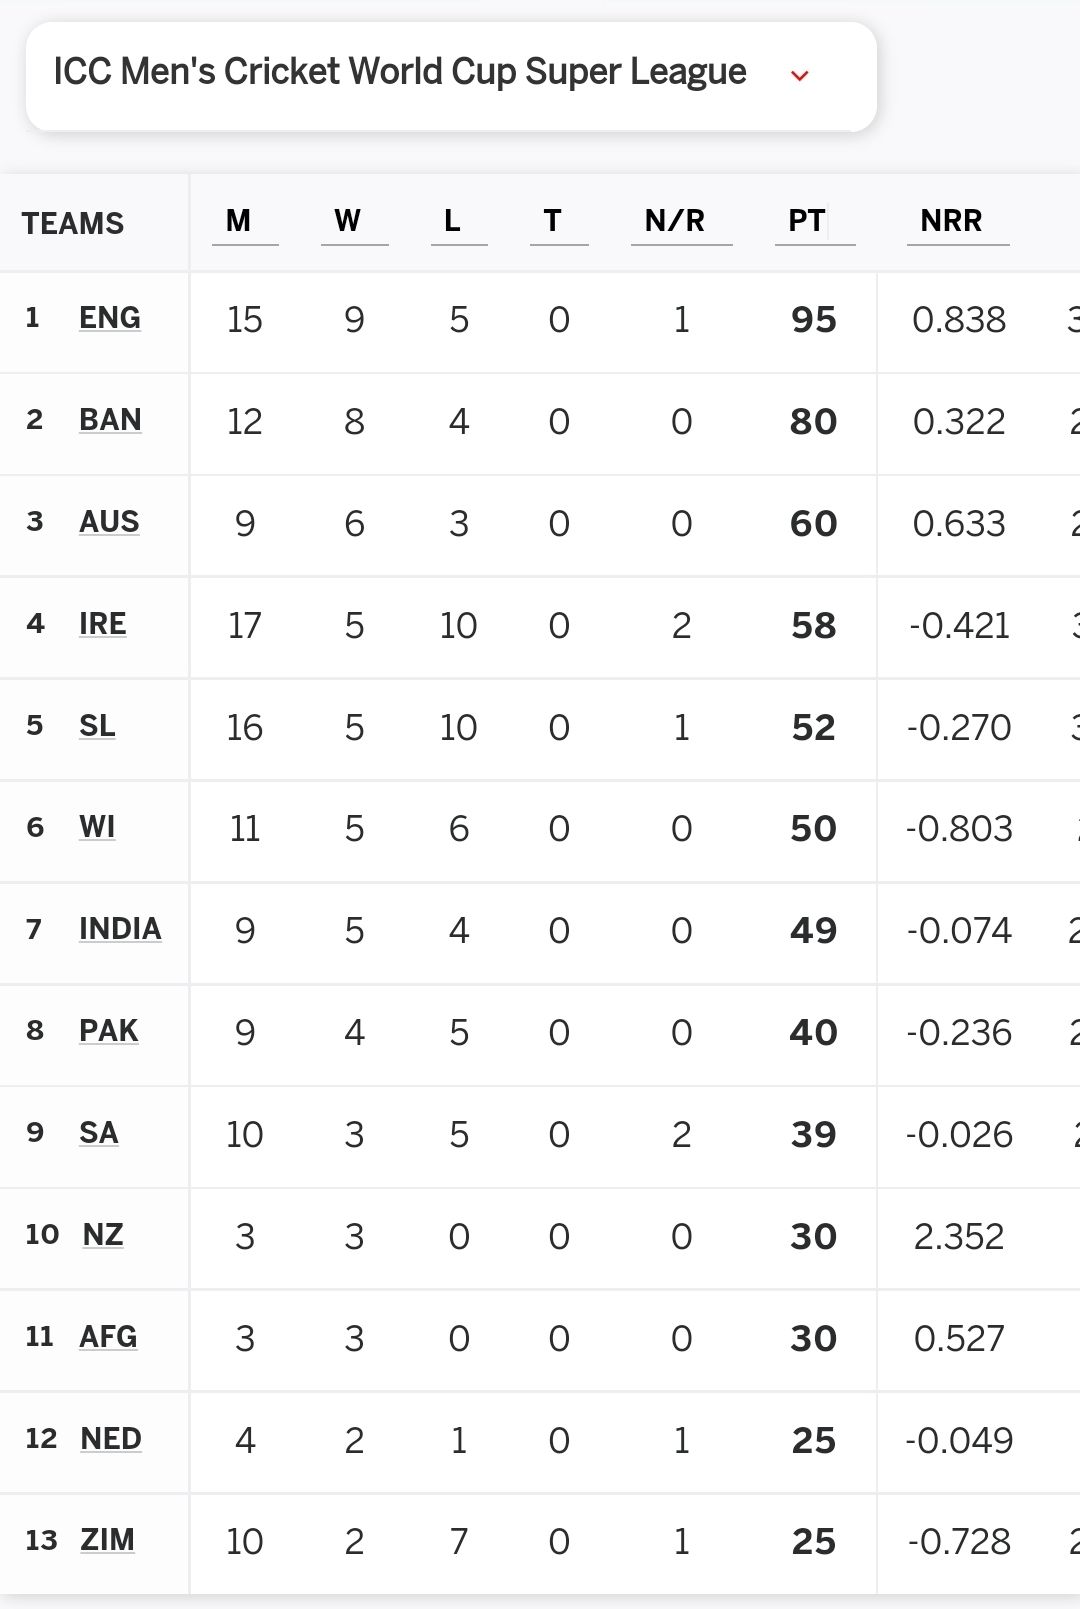 ICC World Cup Super League points table after SL win NewsWire